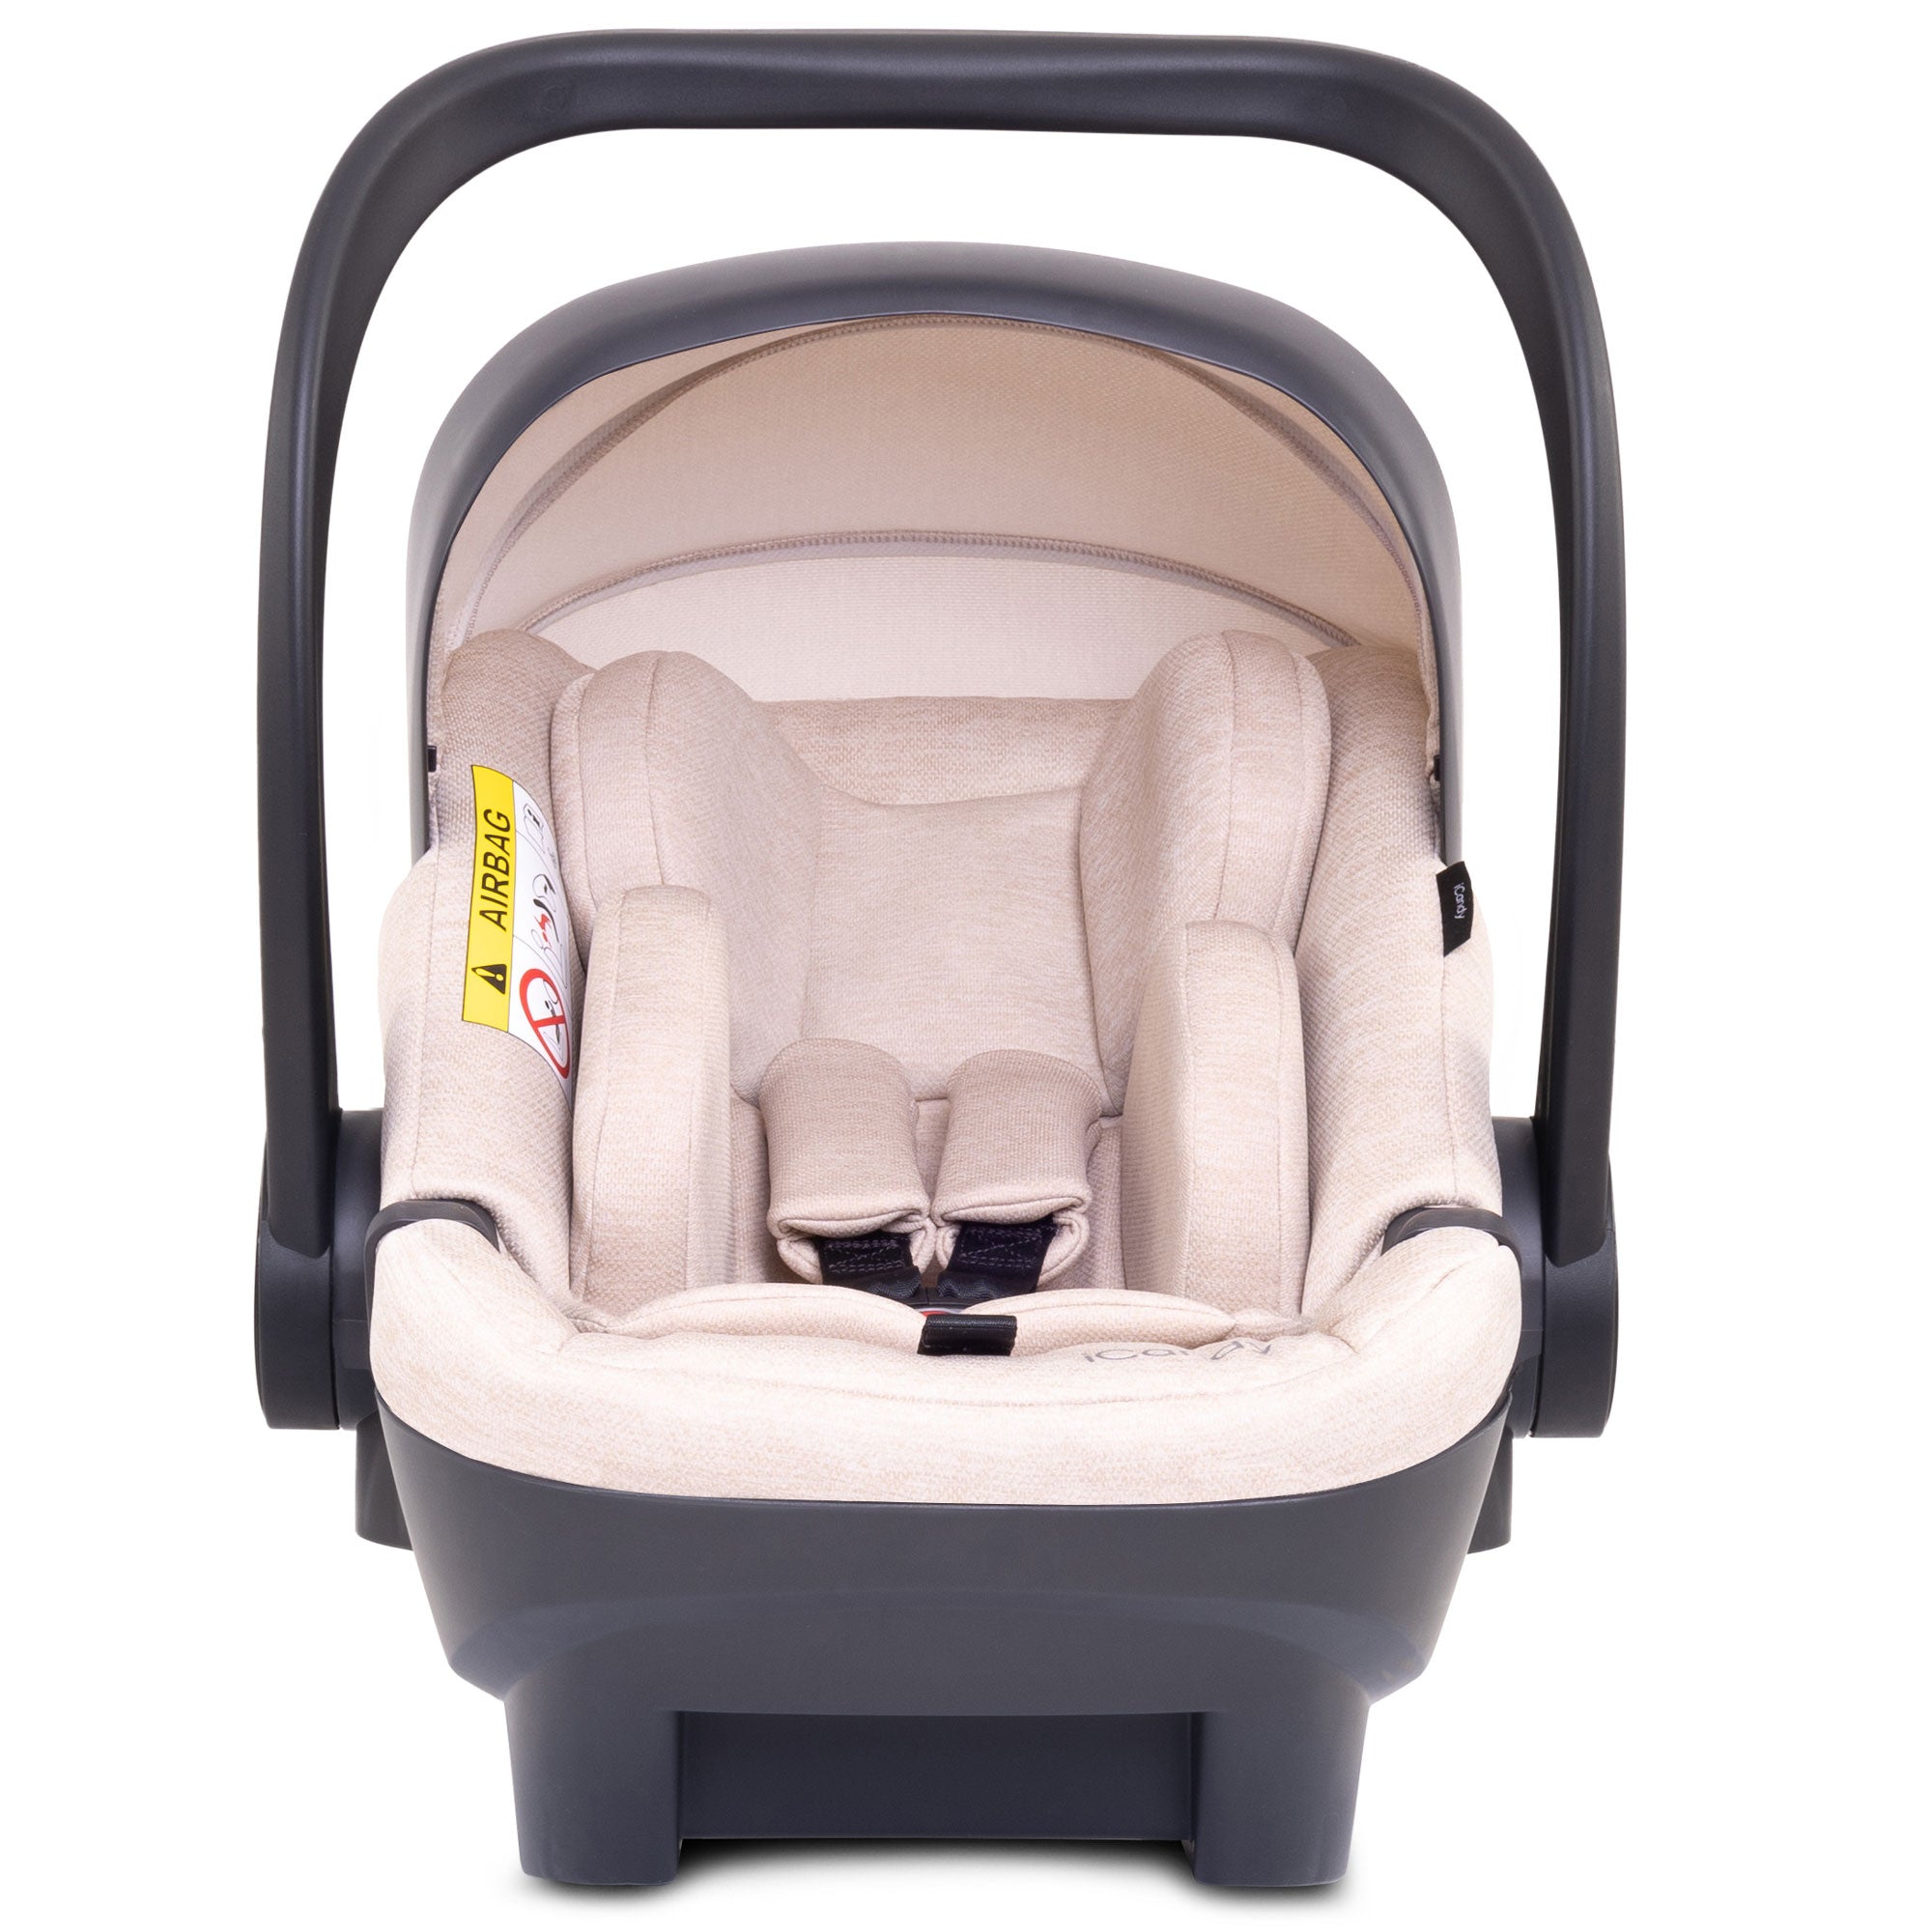 iCandy Peach 7 Complete Bundle with COCOON Car Seat in Cookie